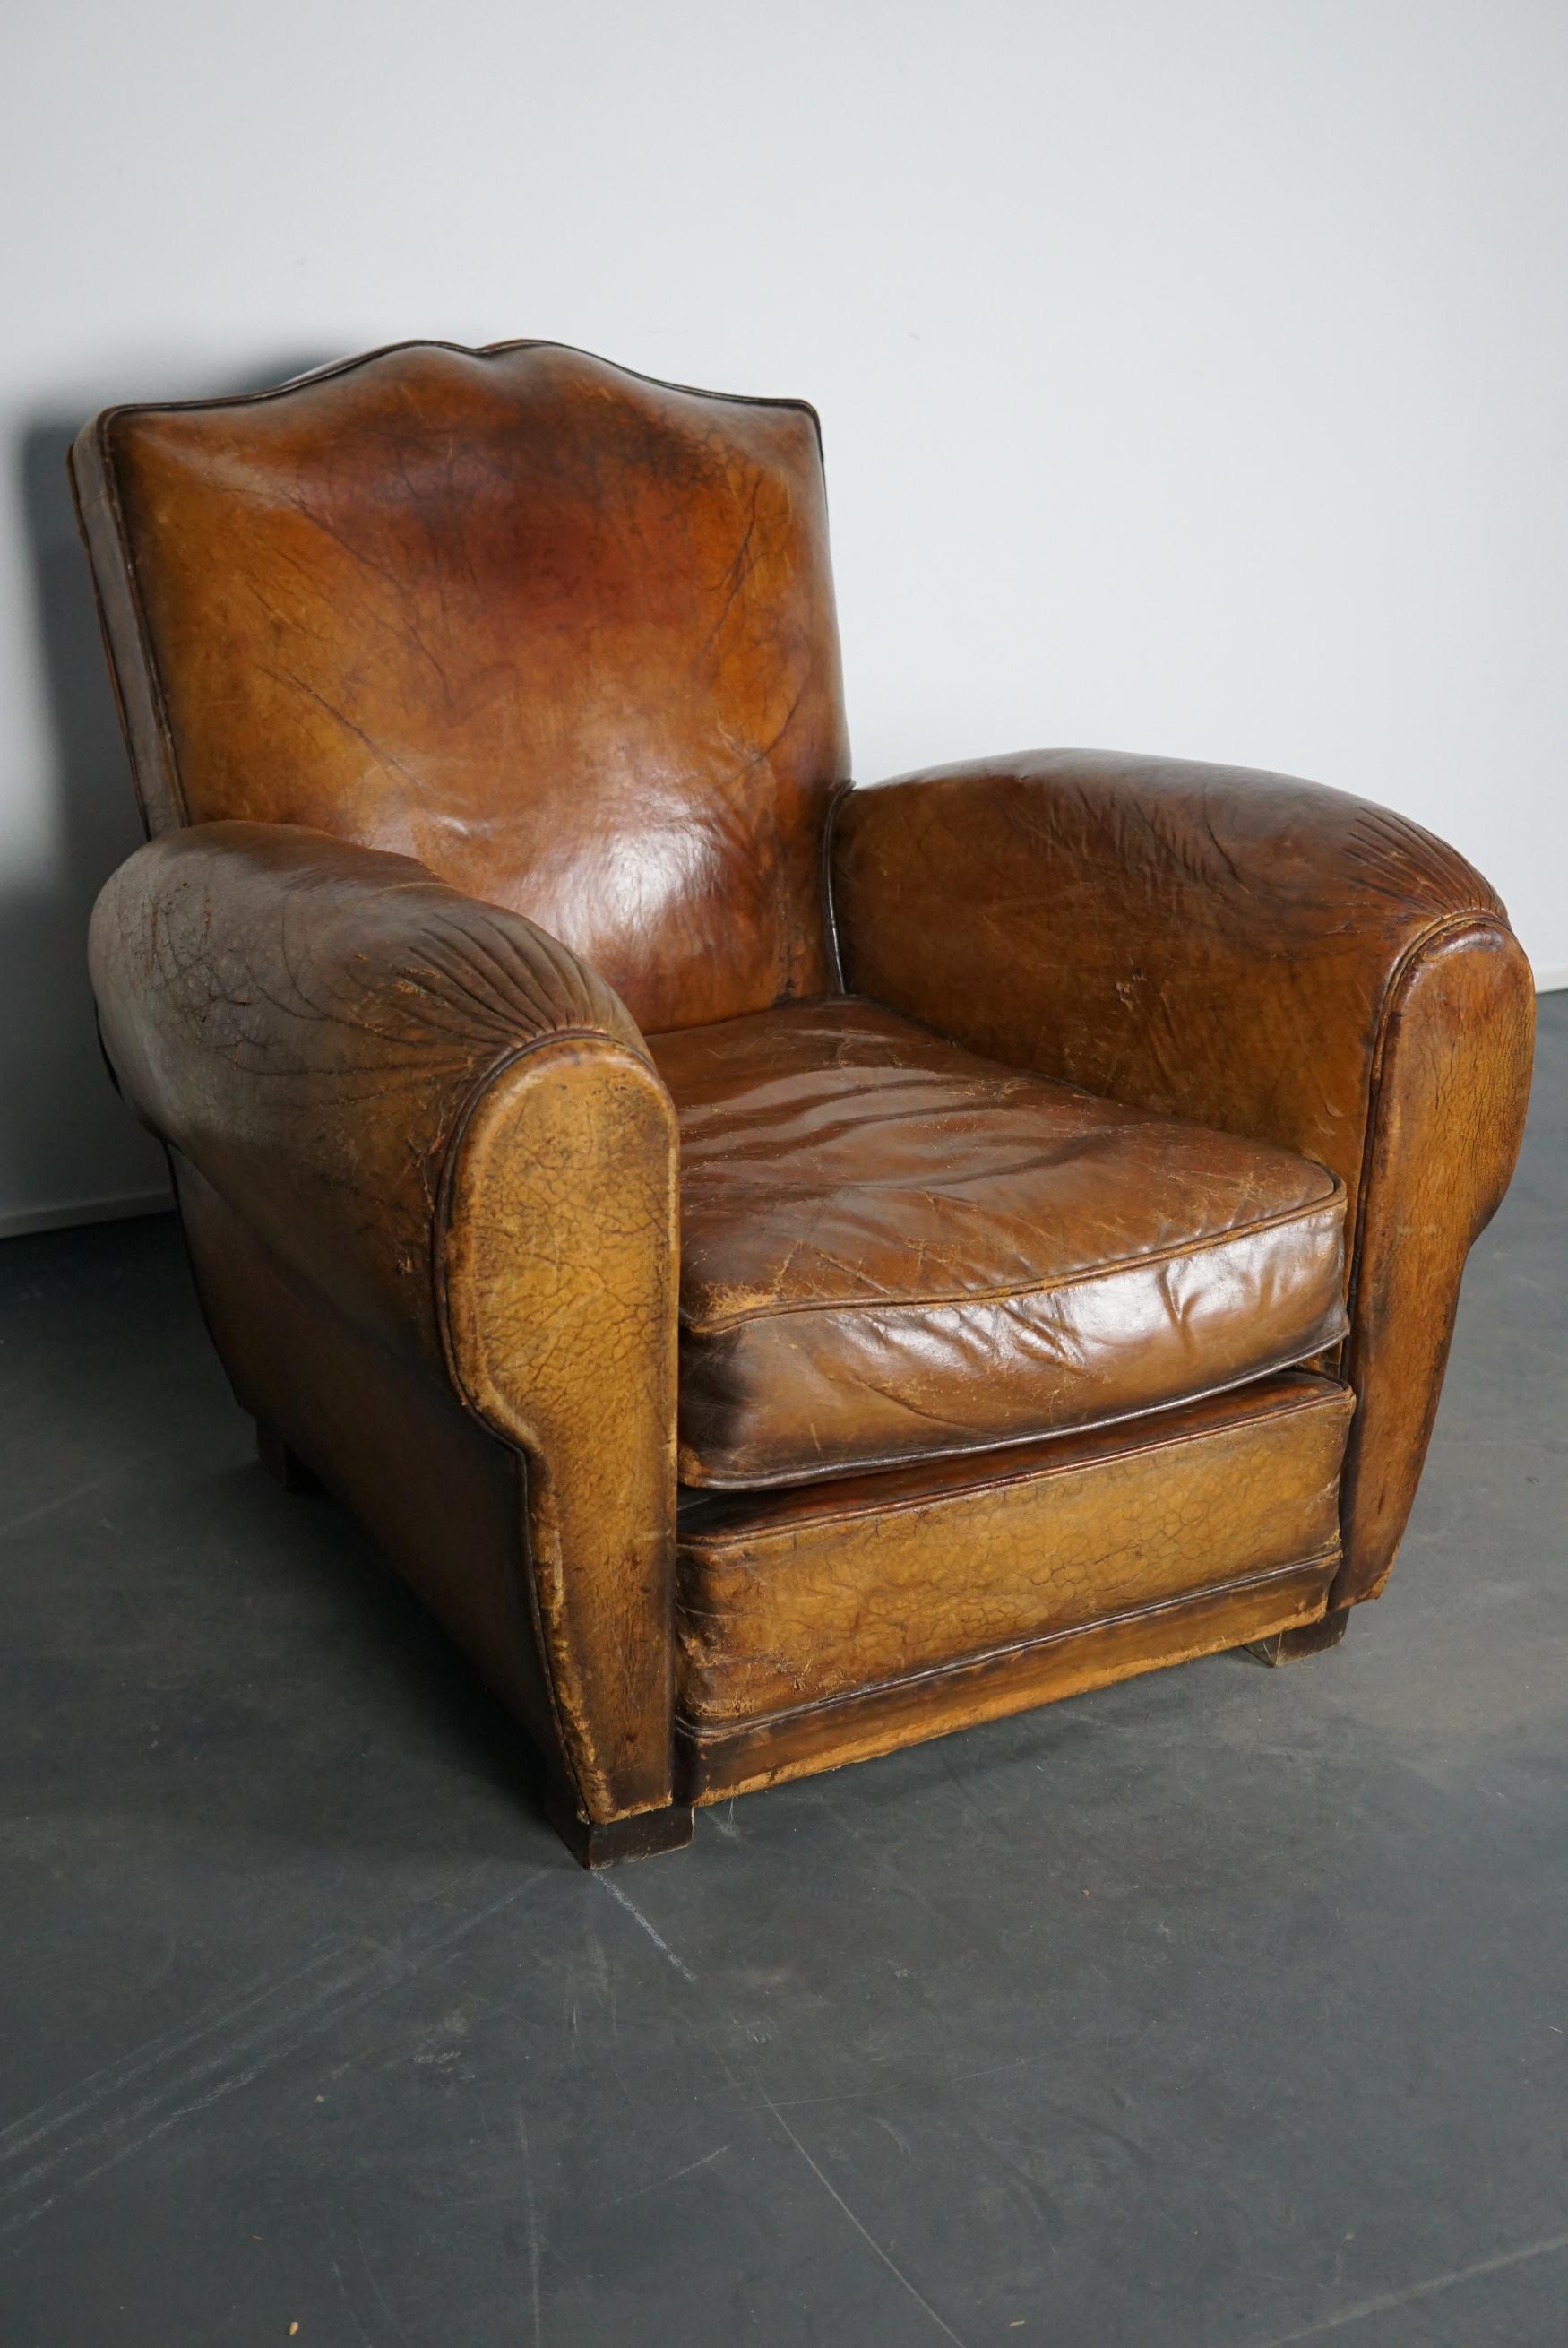 This cognac-colored leather club chair comes from France. It is upholstered with cognac-colored leather and features metal rivets and wooden legs.